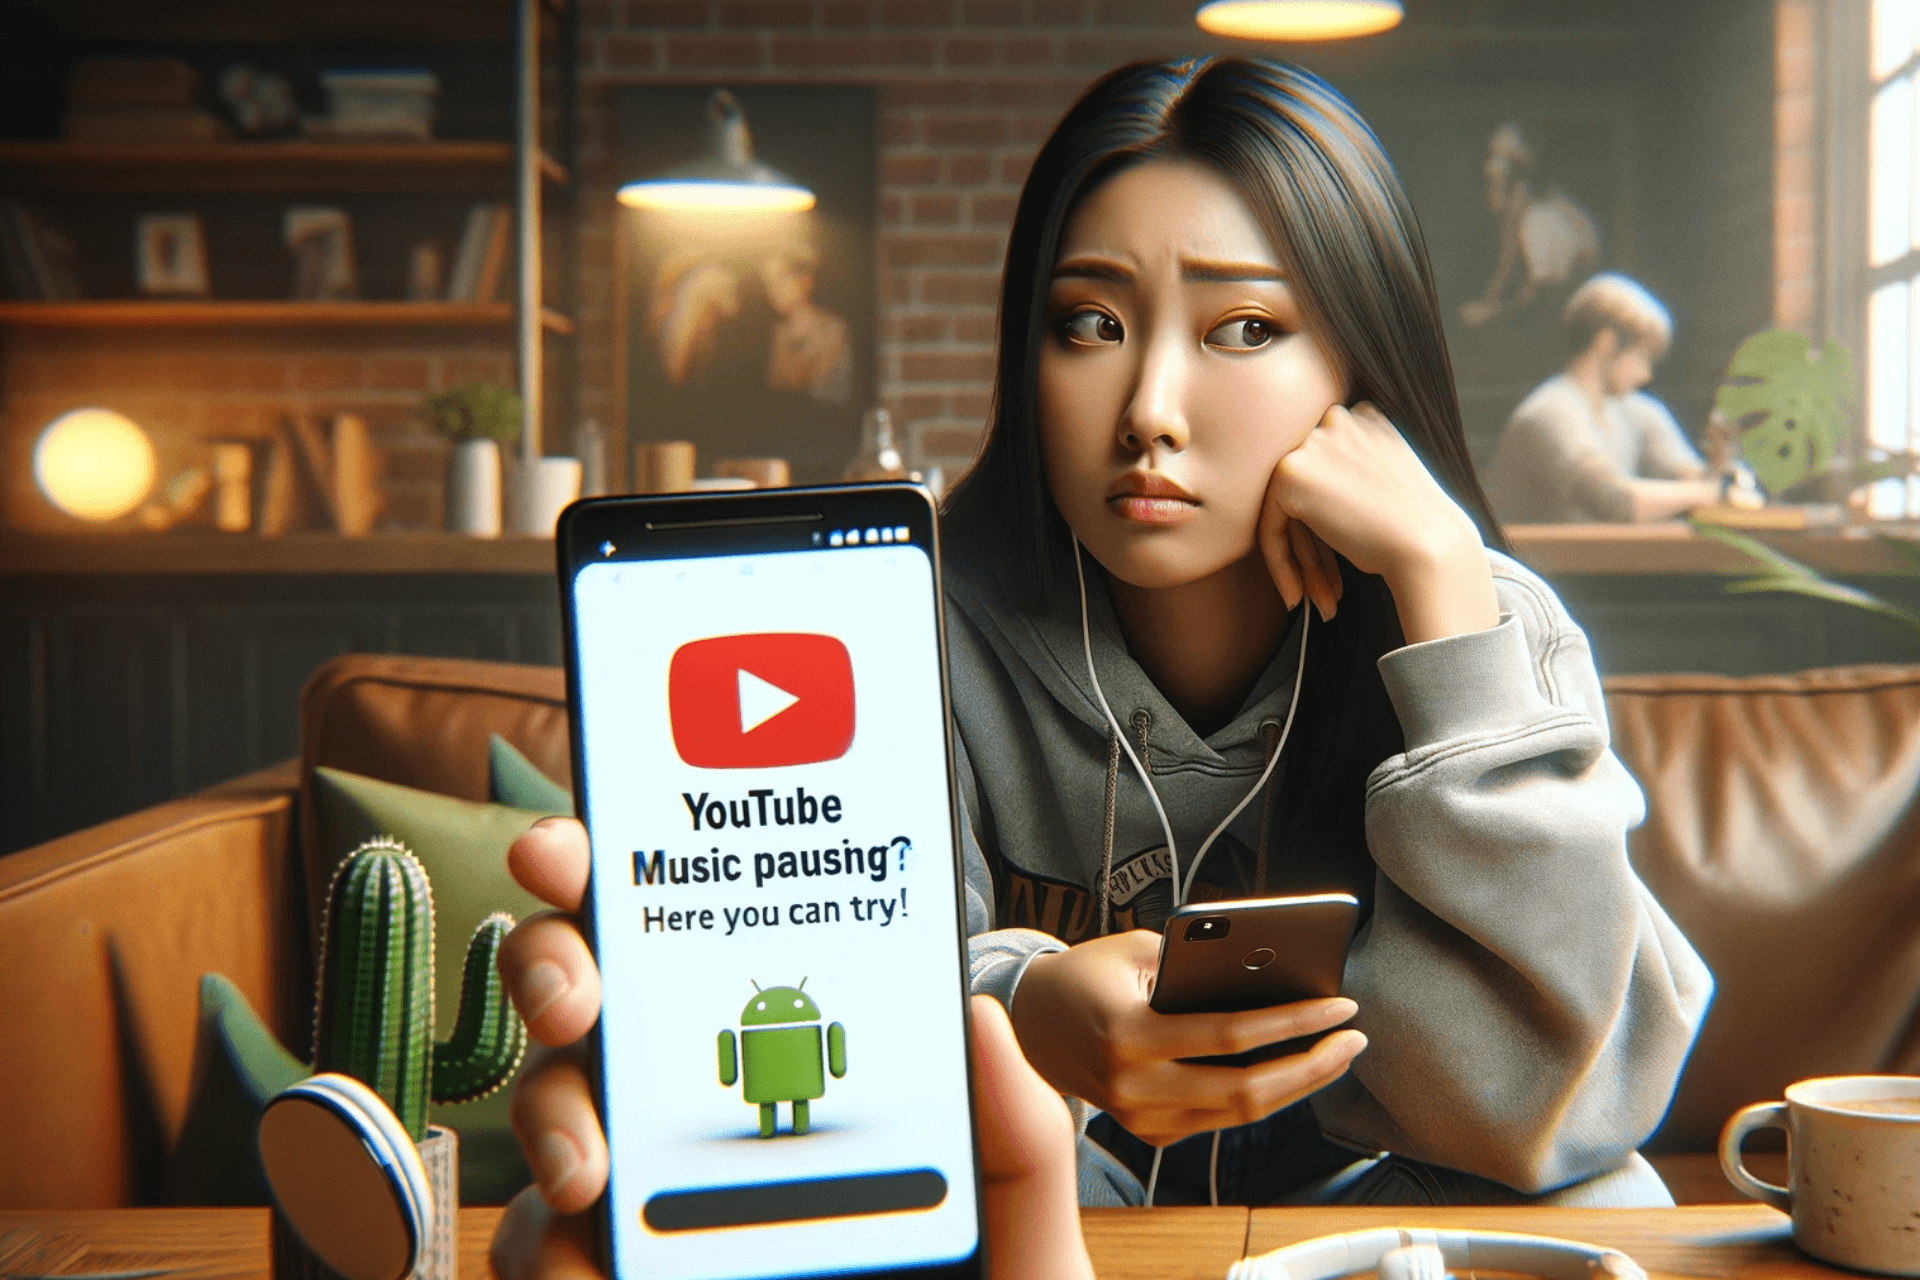 YouTube Music Keep Pausing? Here are Fixes You Can Try!